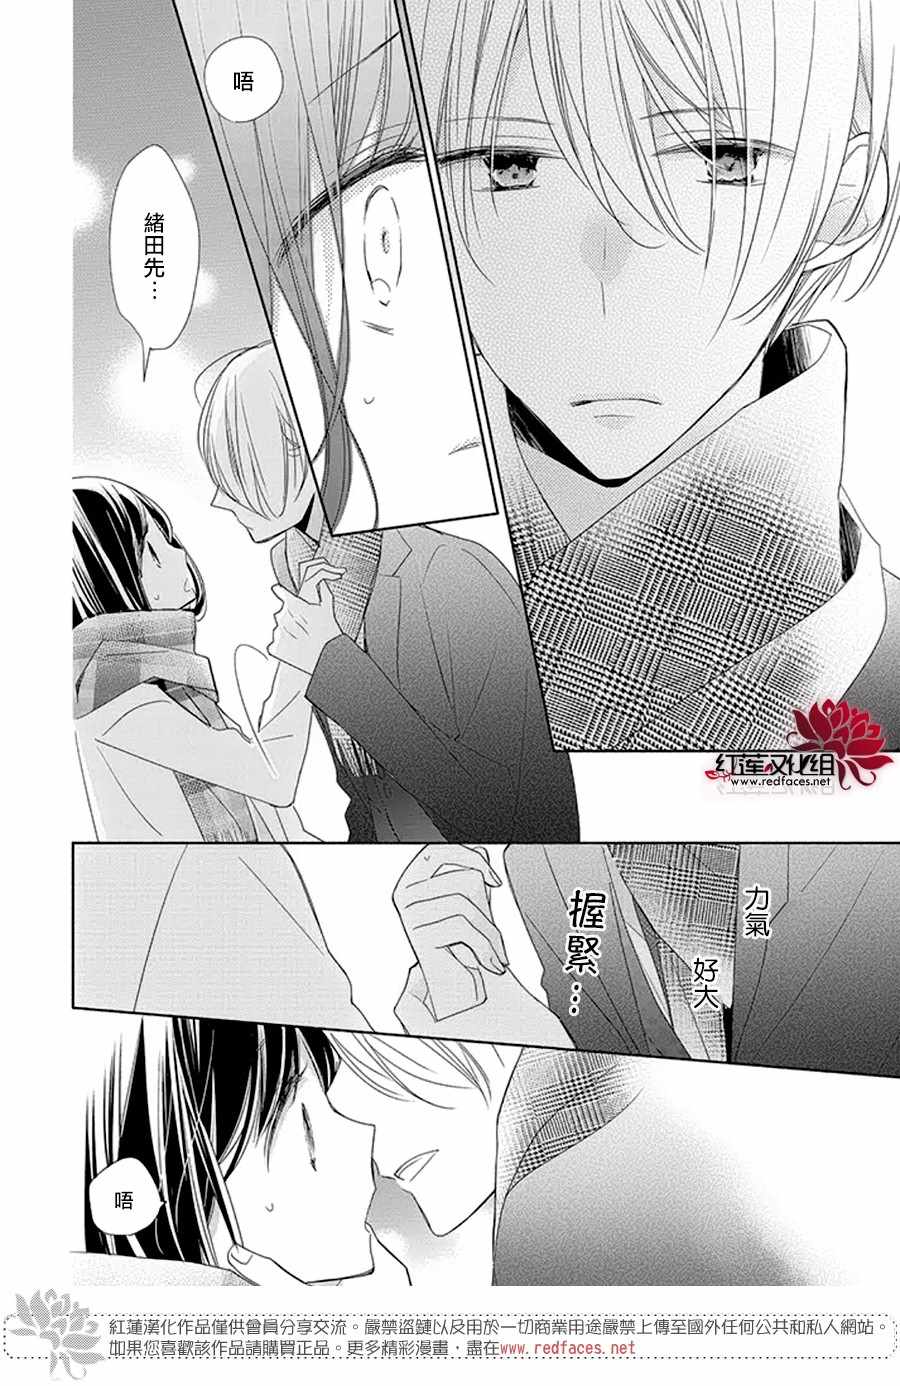 If given a second chance - 18話 - 1